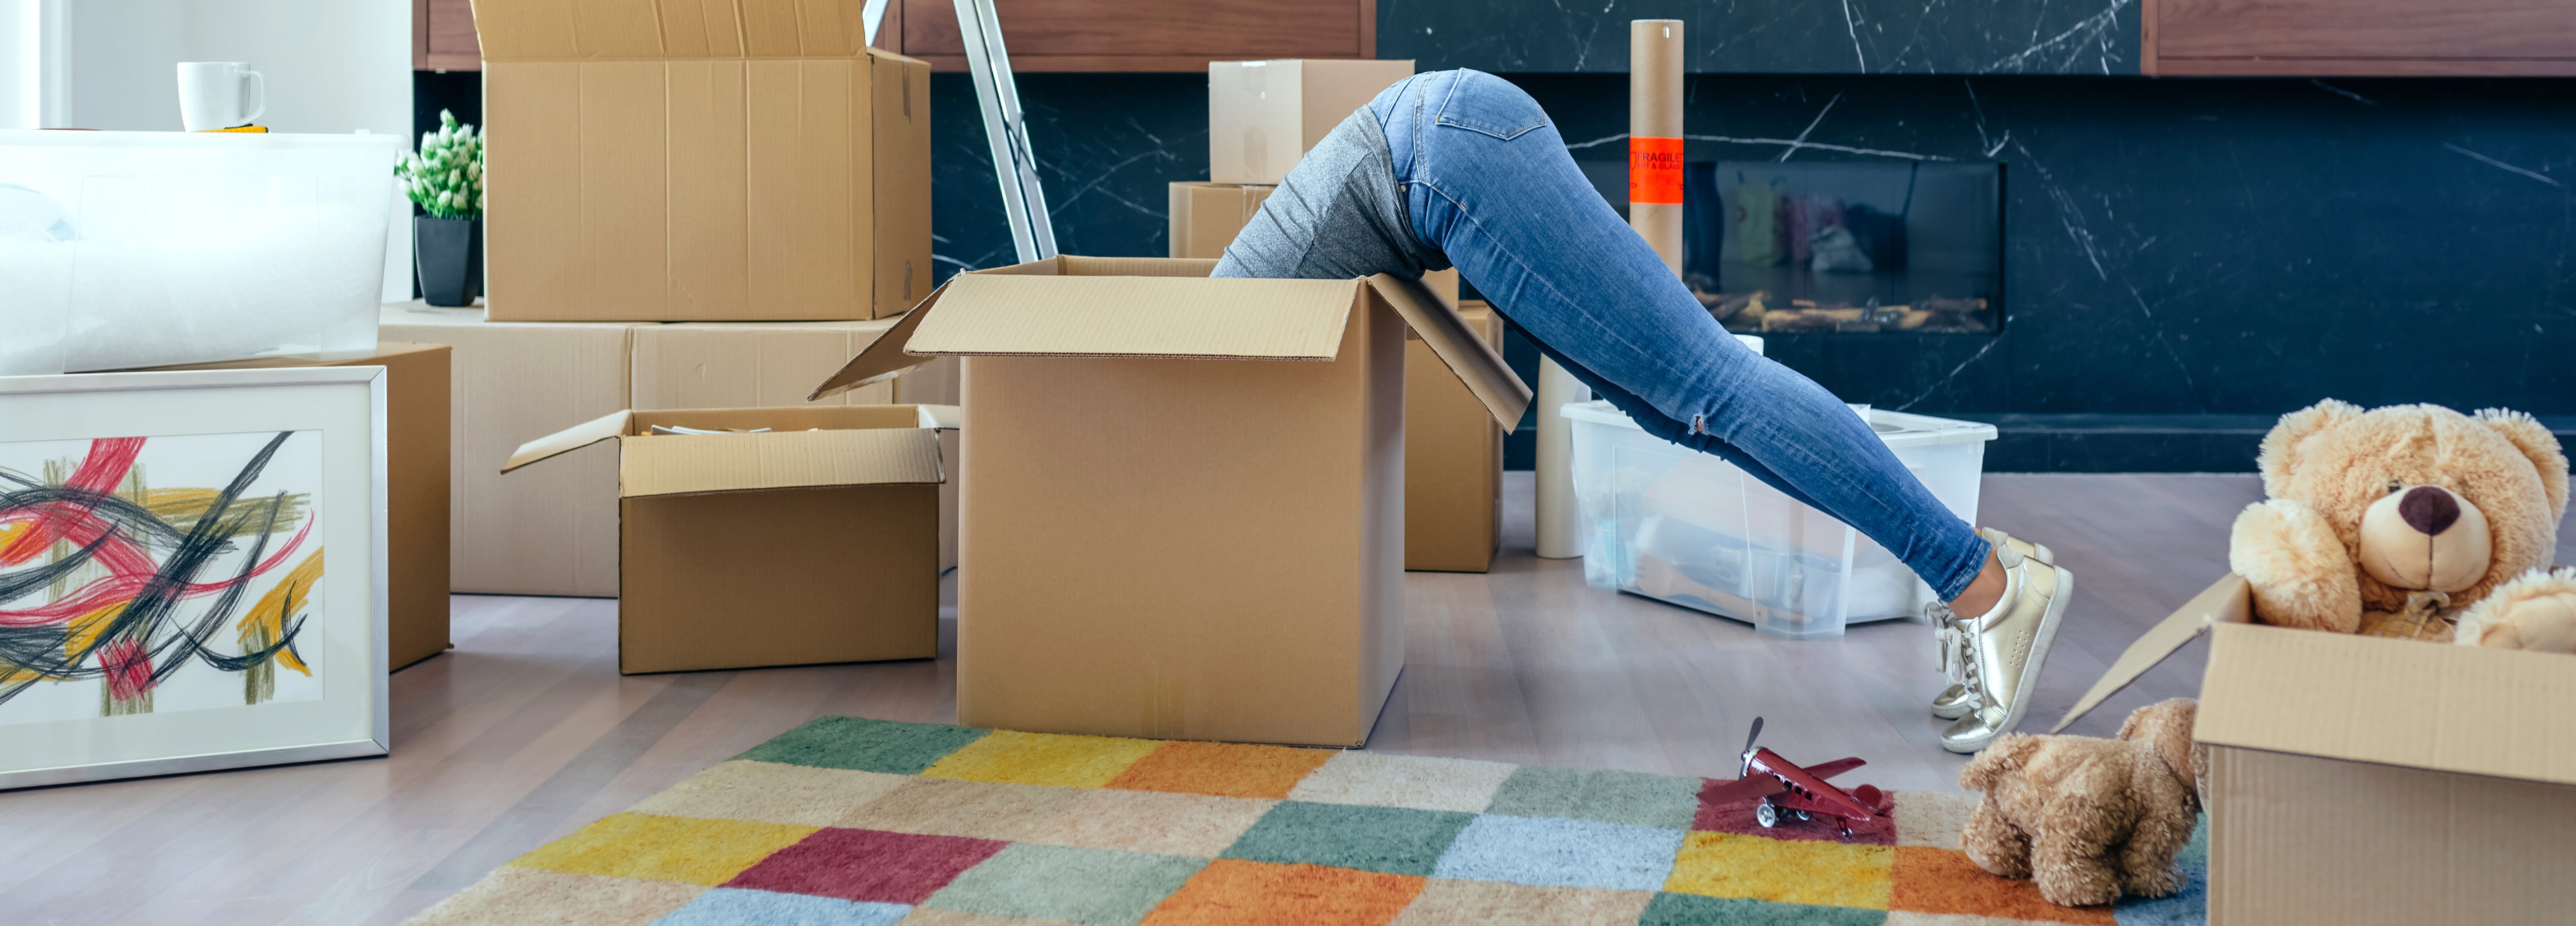 Women packing up home fast lands in box